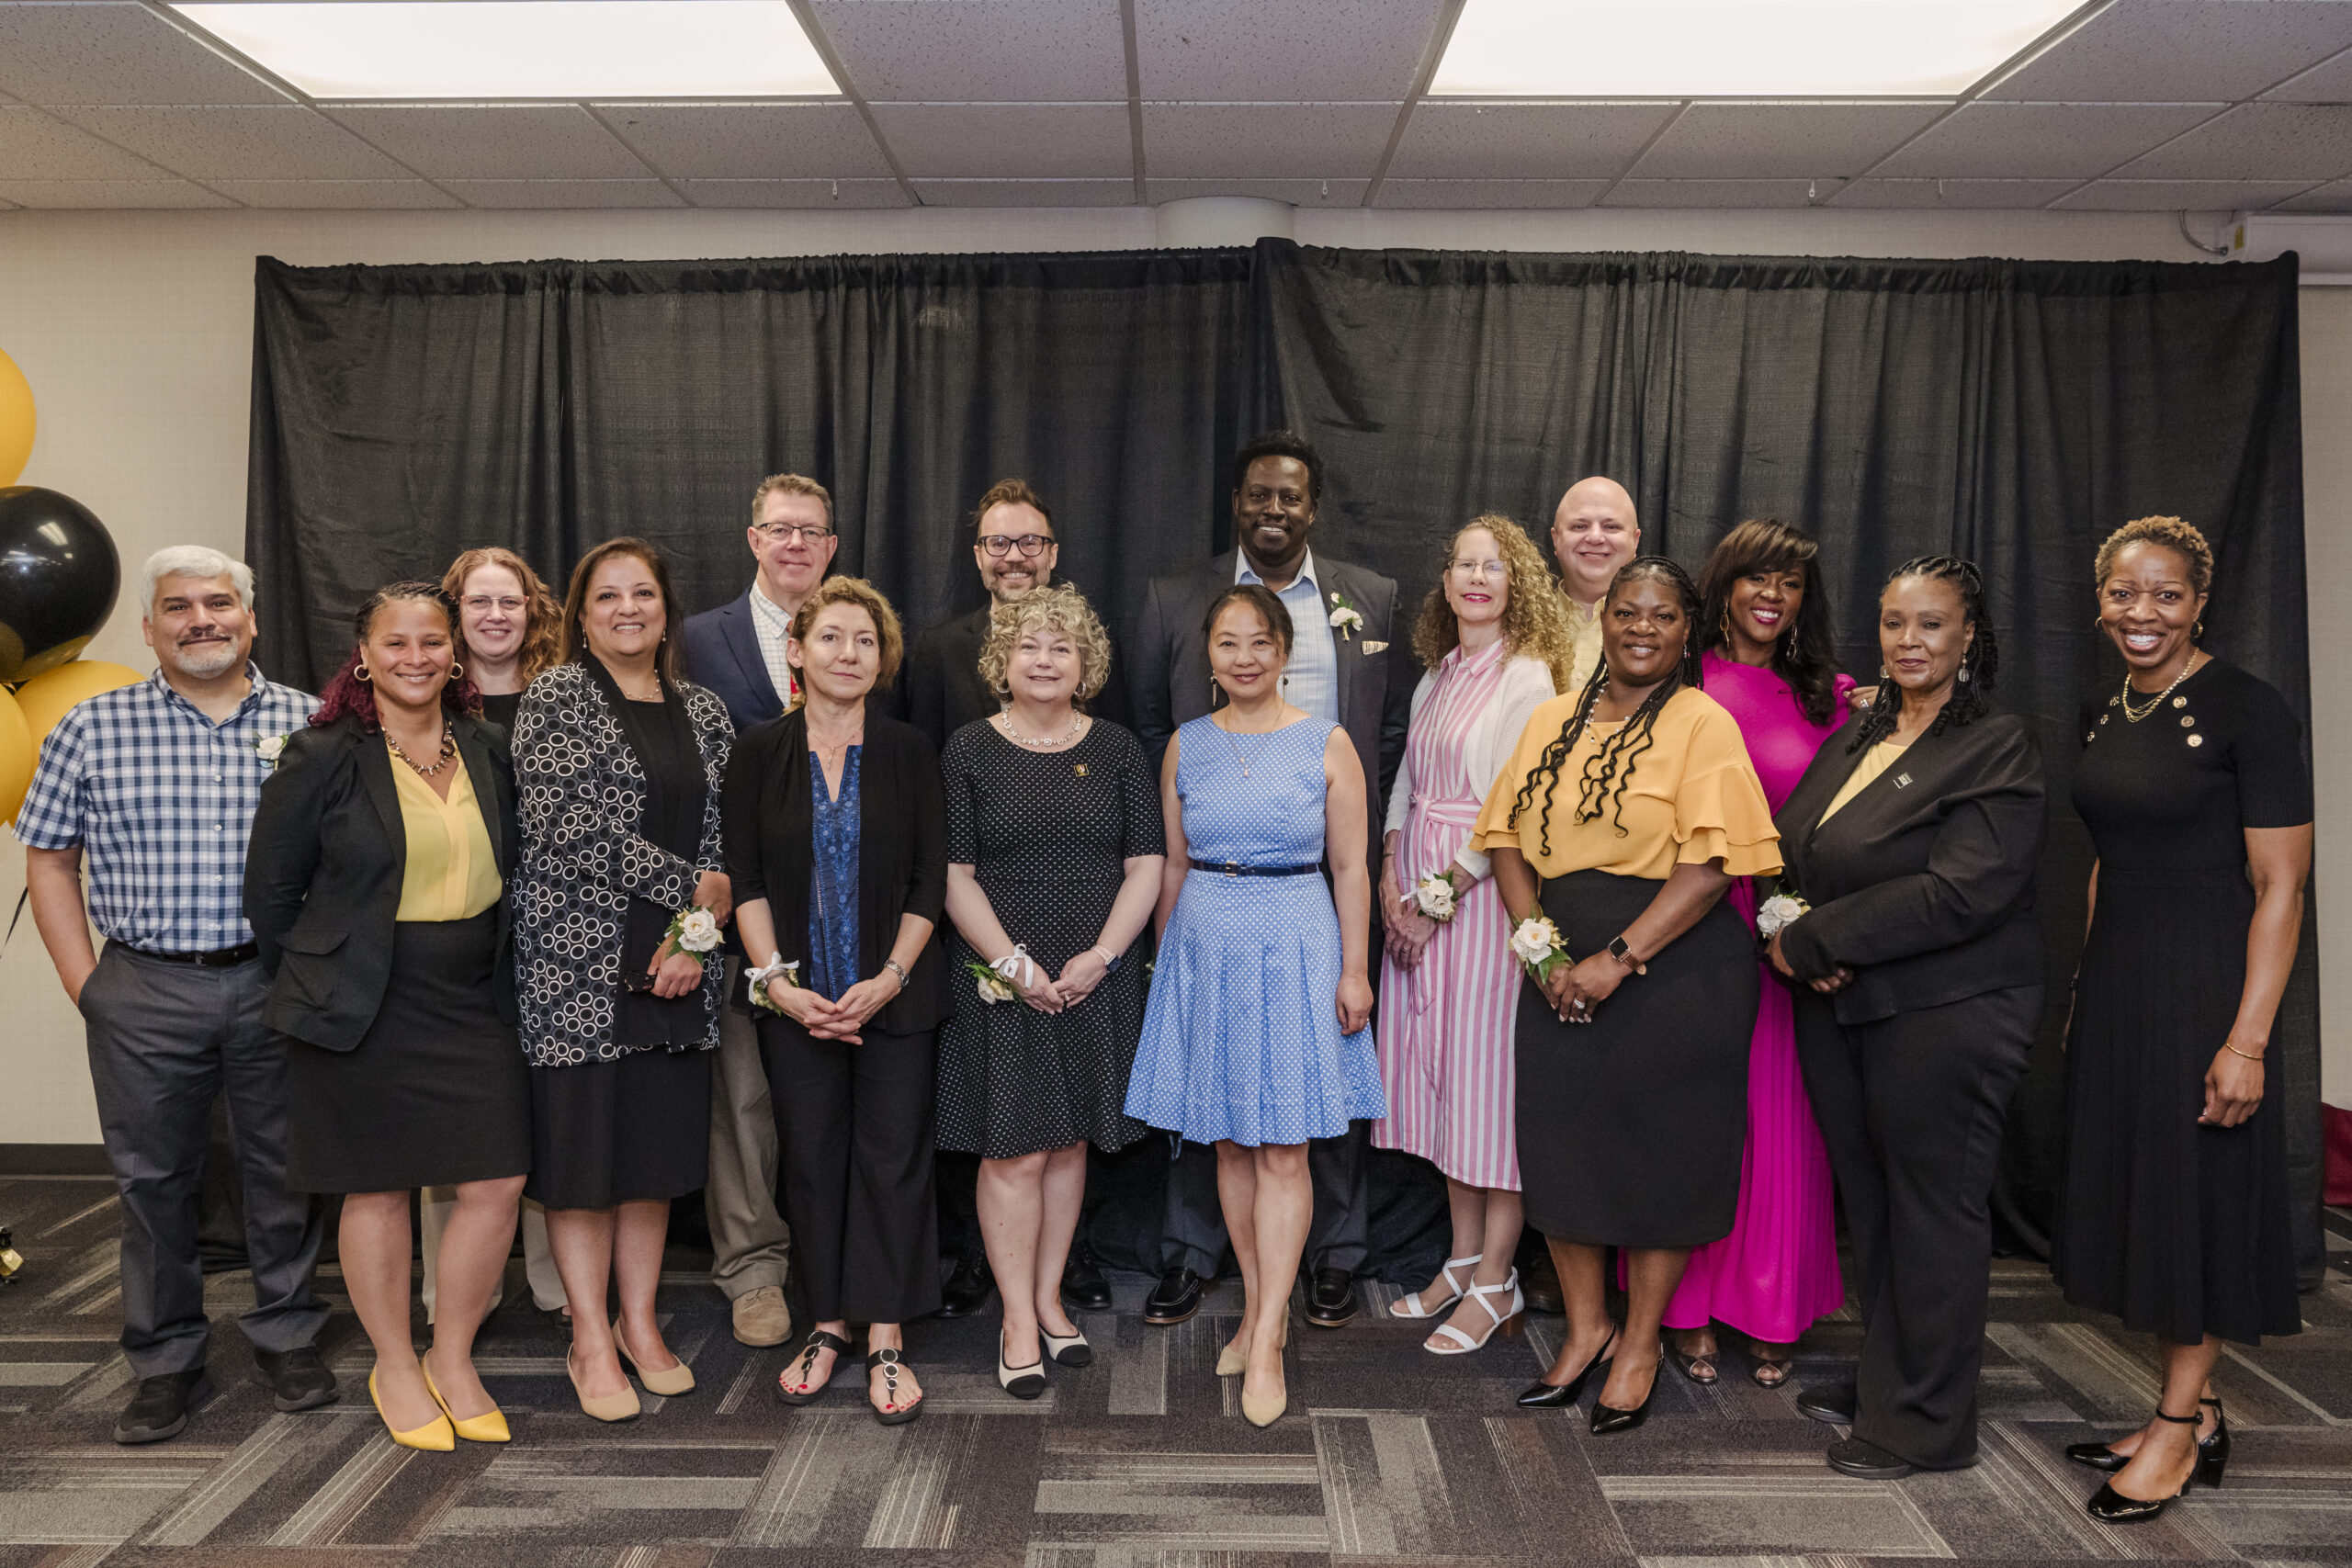 UMBC celebrates our outstanding community at annual Presidential Faculty and Staff Awards